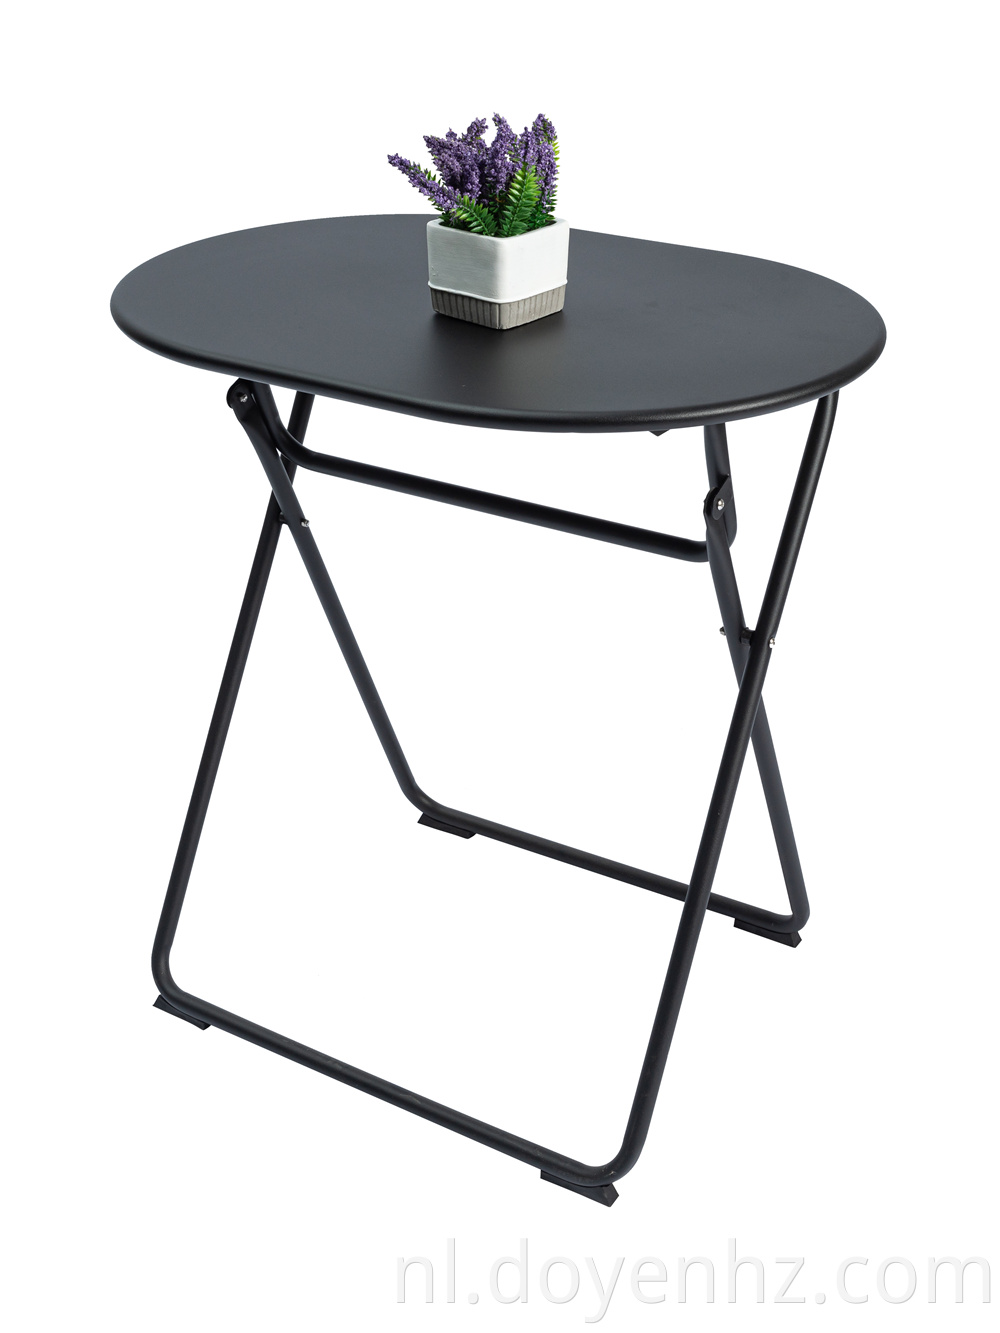 Metal Folding Oval Outdoor Table